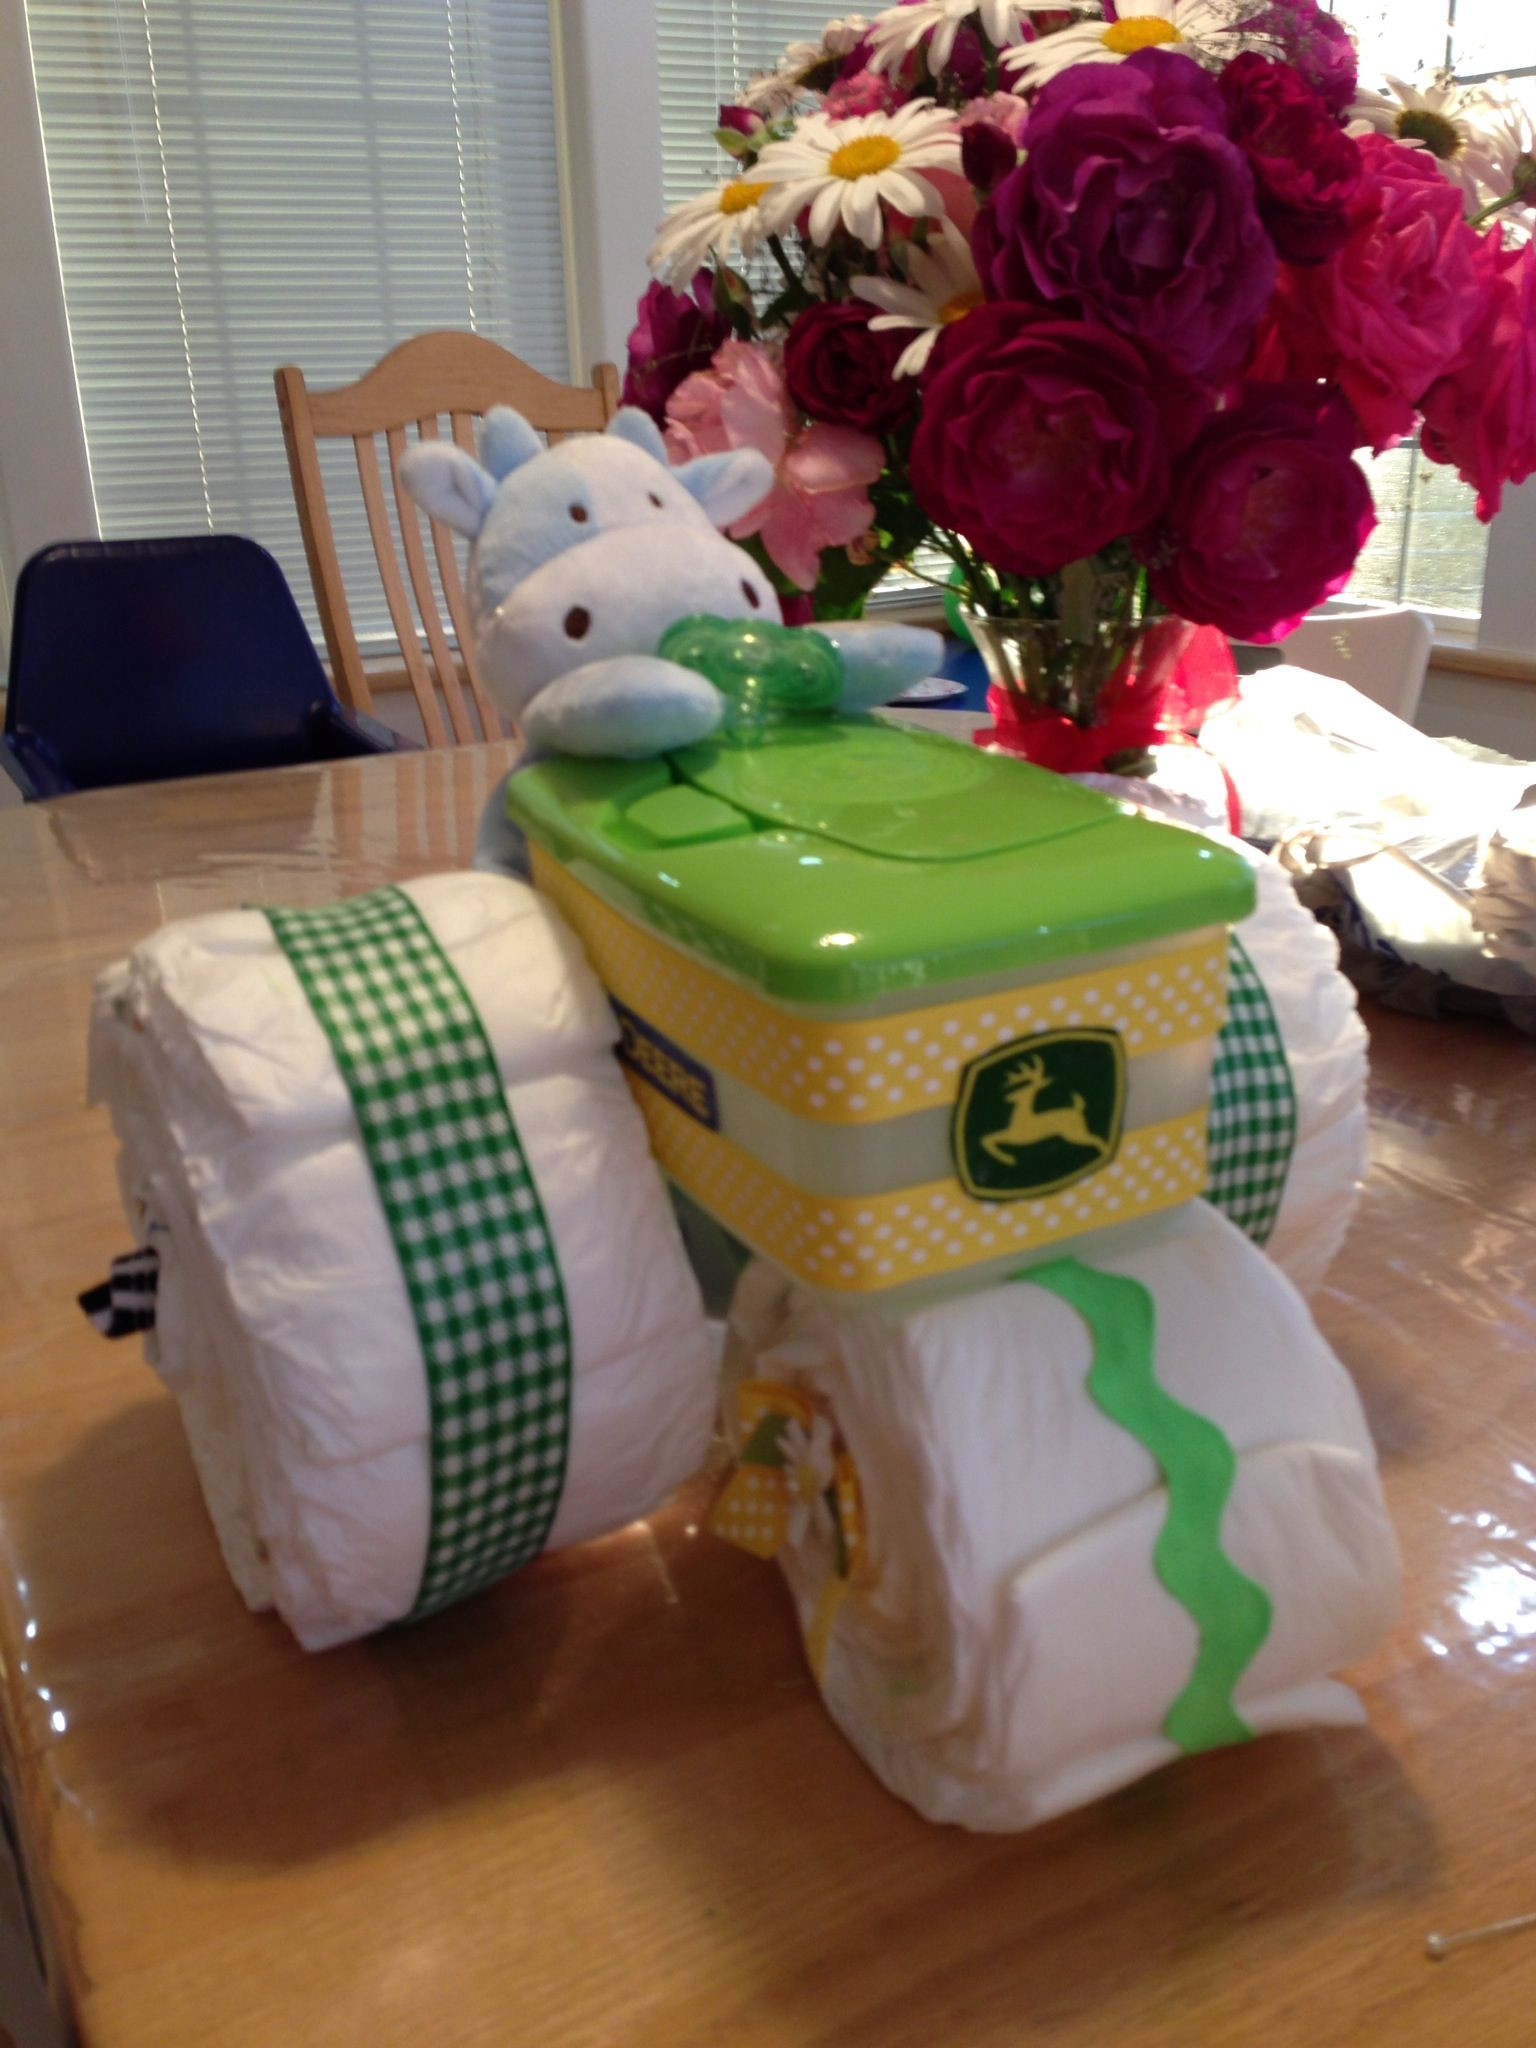 Crafty Baby Shower Gift Ideas
 Diaper tractor for my daughter s new baby in 2019